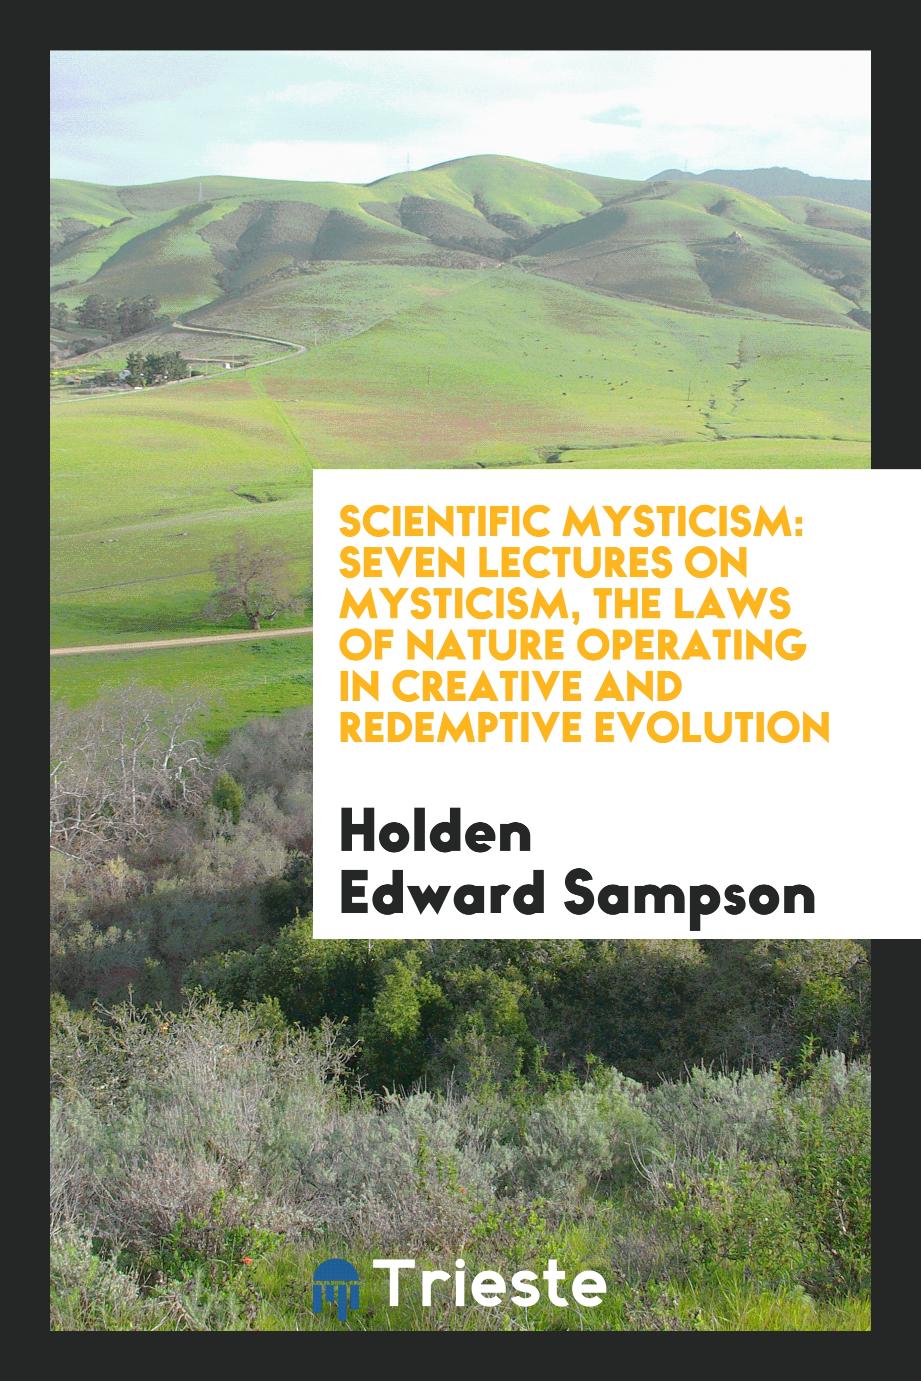 Scientific Mysticism: Seven Lectures on Mysticism, the Laws of Nature Operating in Creative and Redemptive Evolution